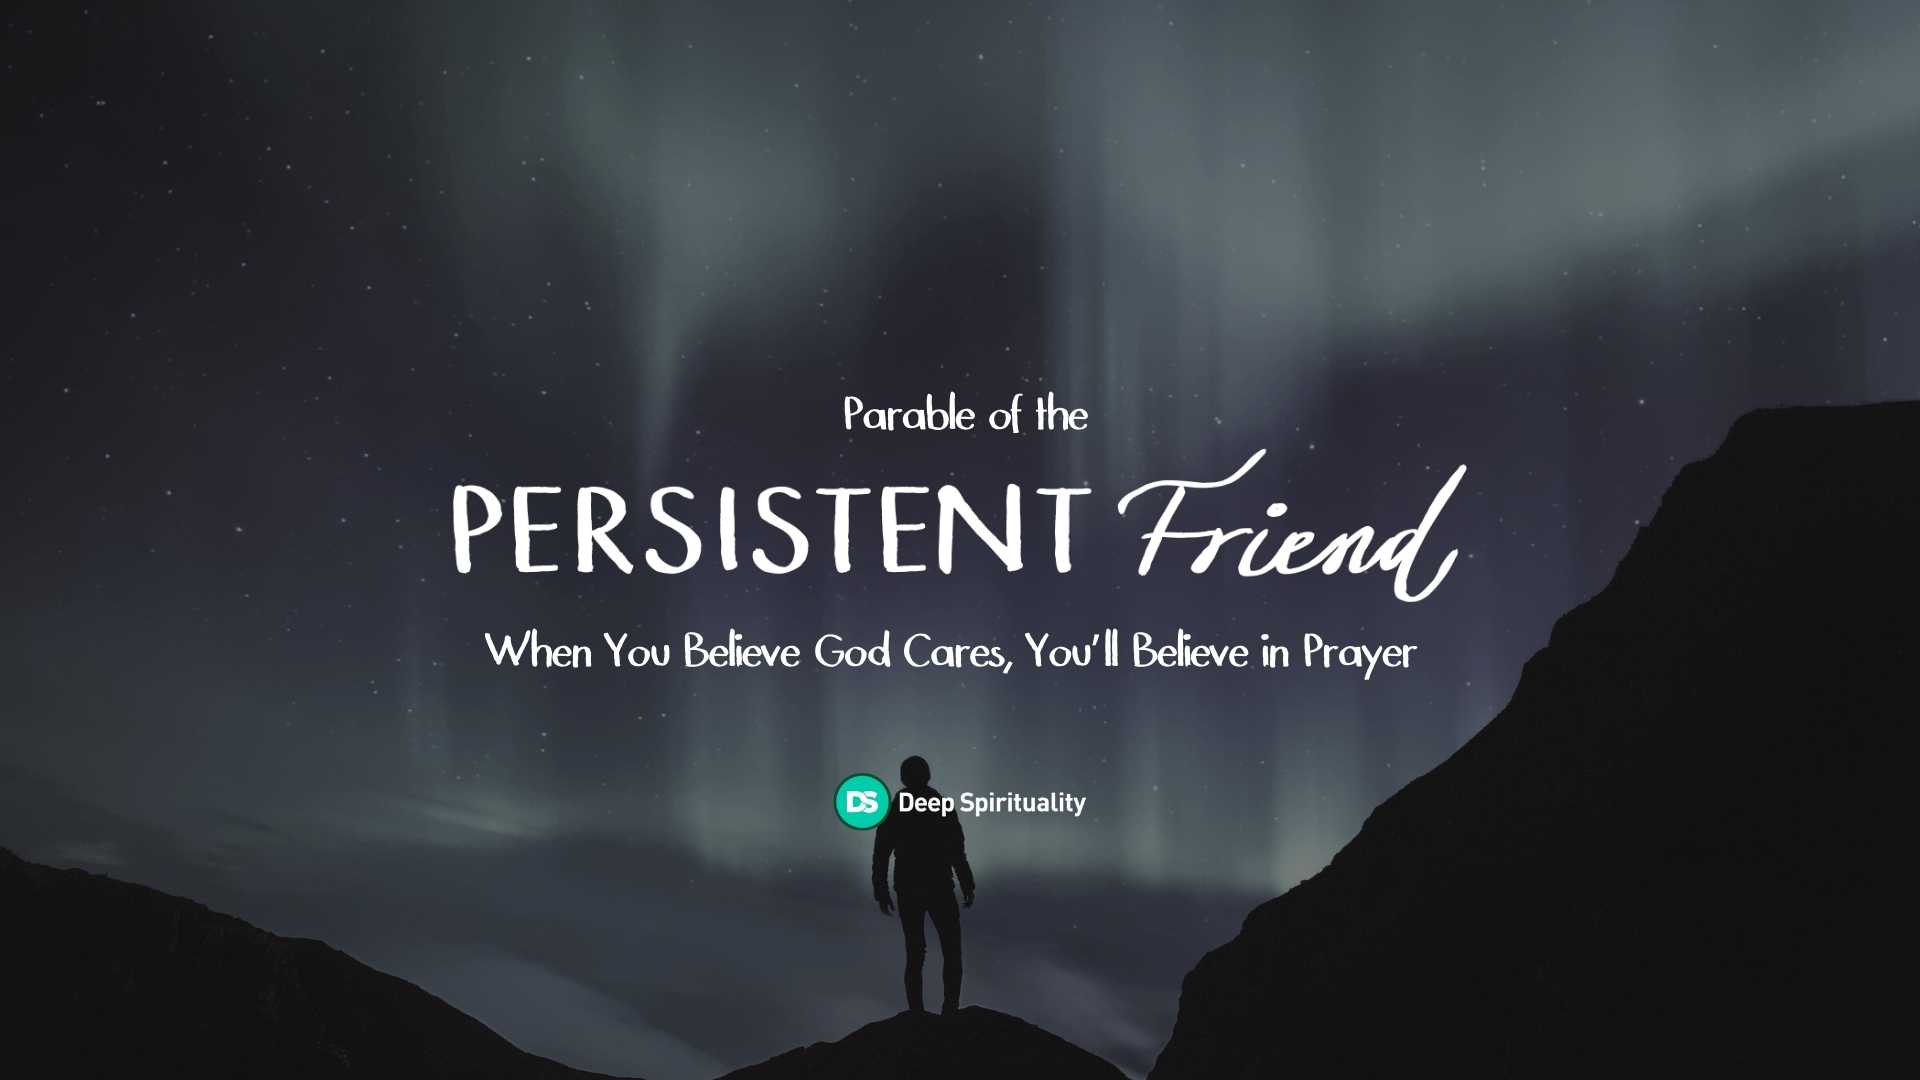 You Can Count On Me: What We Should Learn from the Parable of the Persistent Friend 23